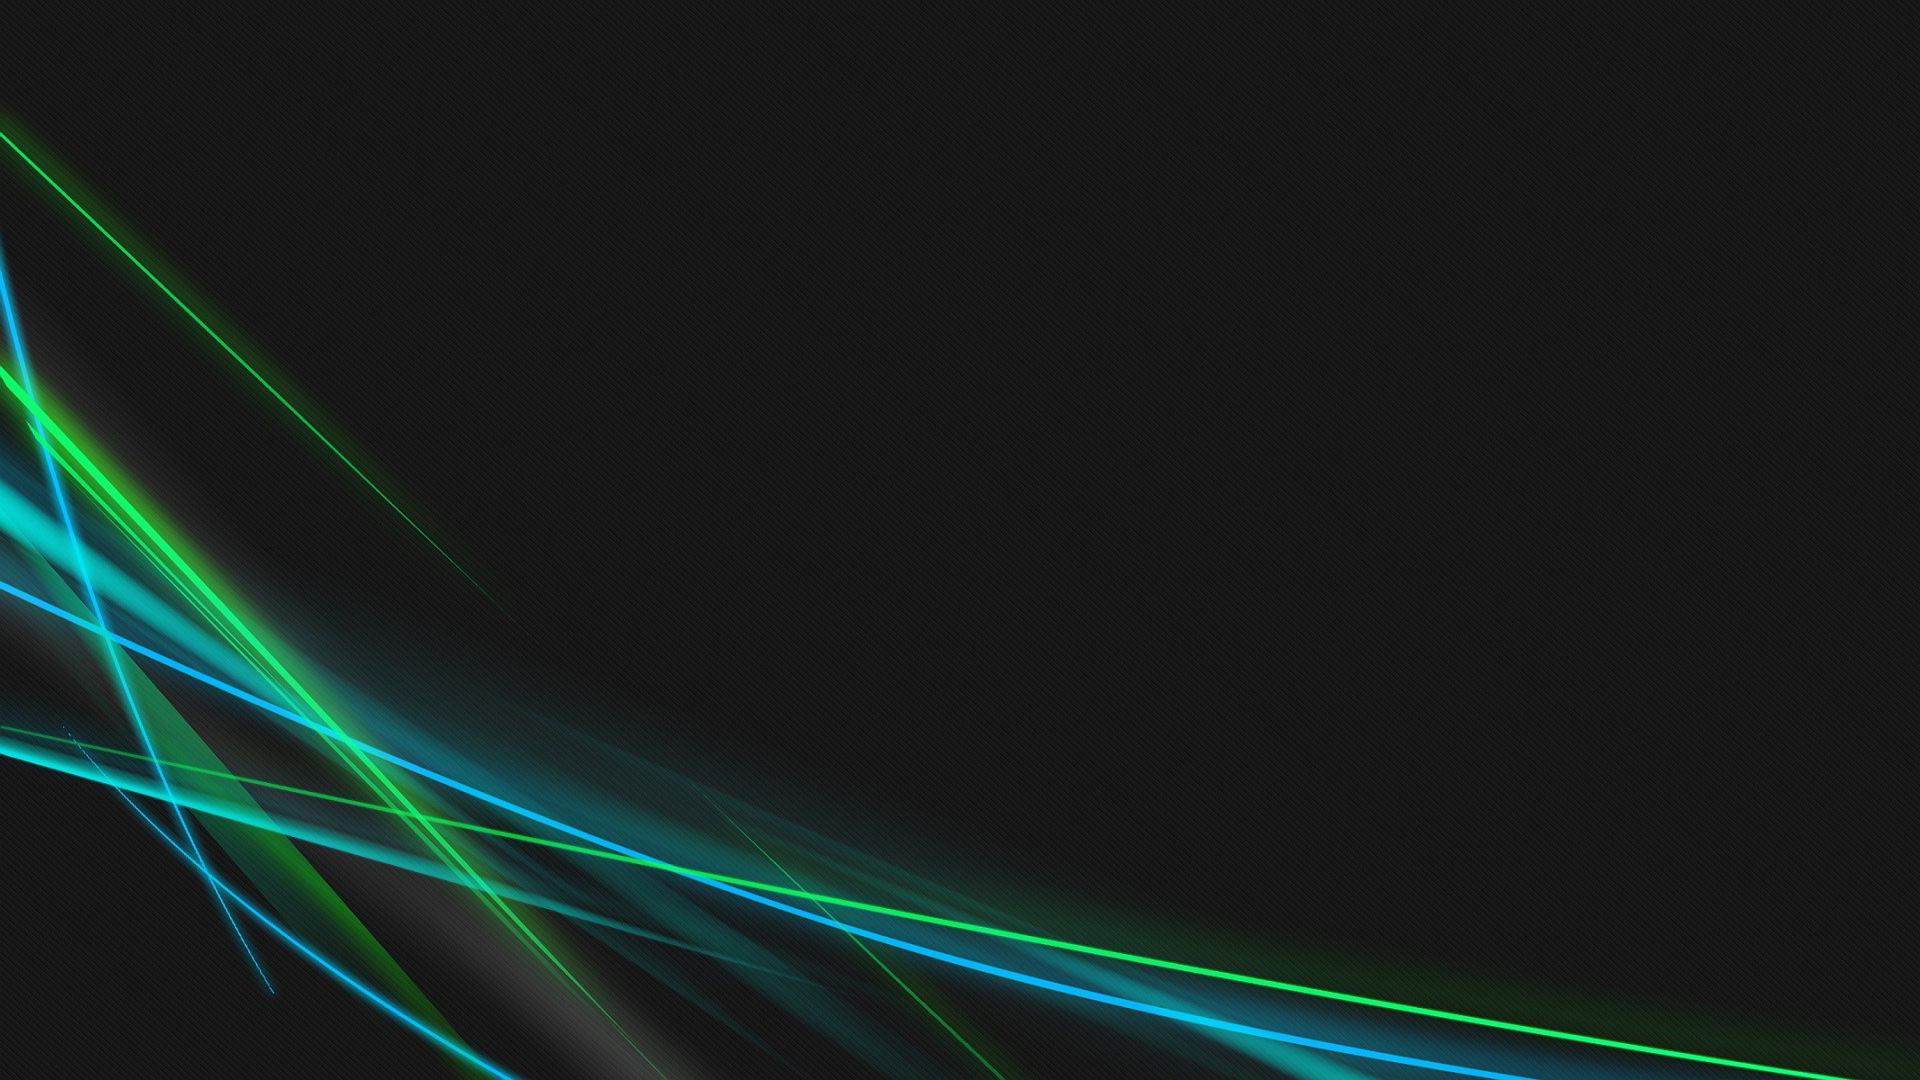 Blue and green neon curves wallpaper – 578863